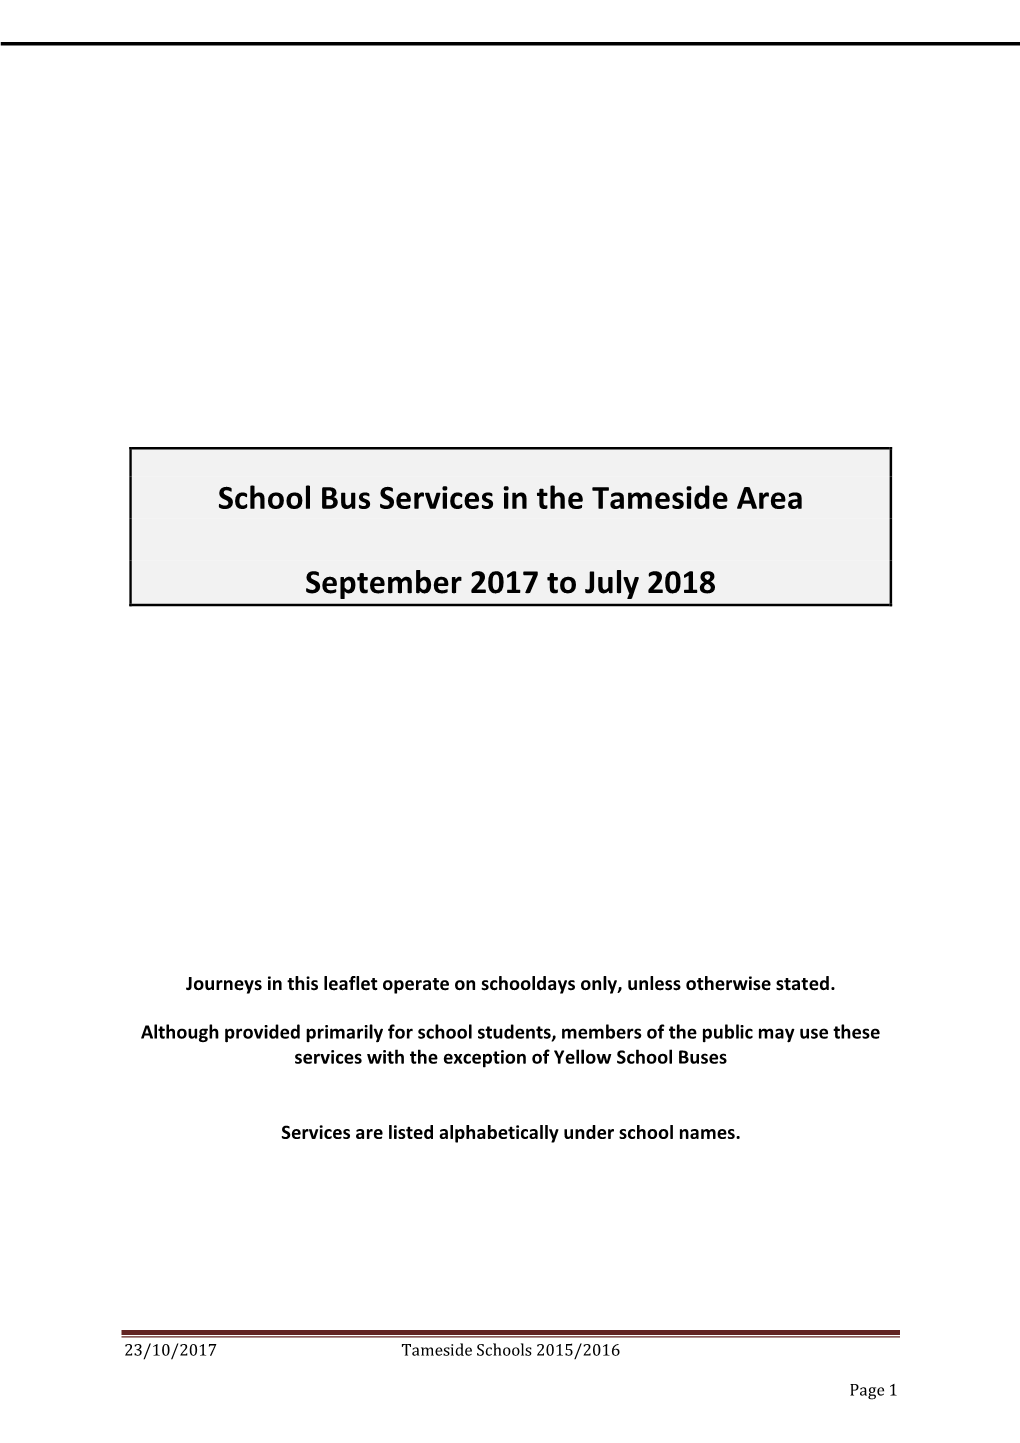 School Bus Services in the Tameside Area September 2017 to July 2018